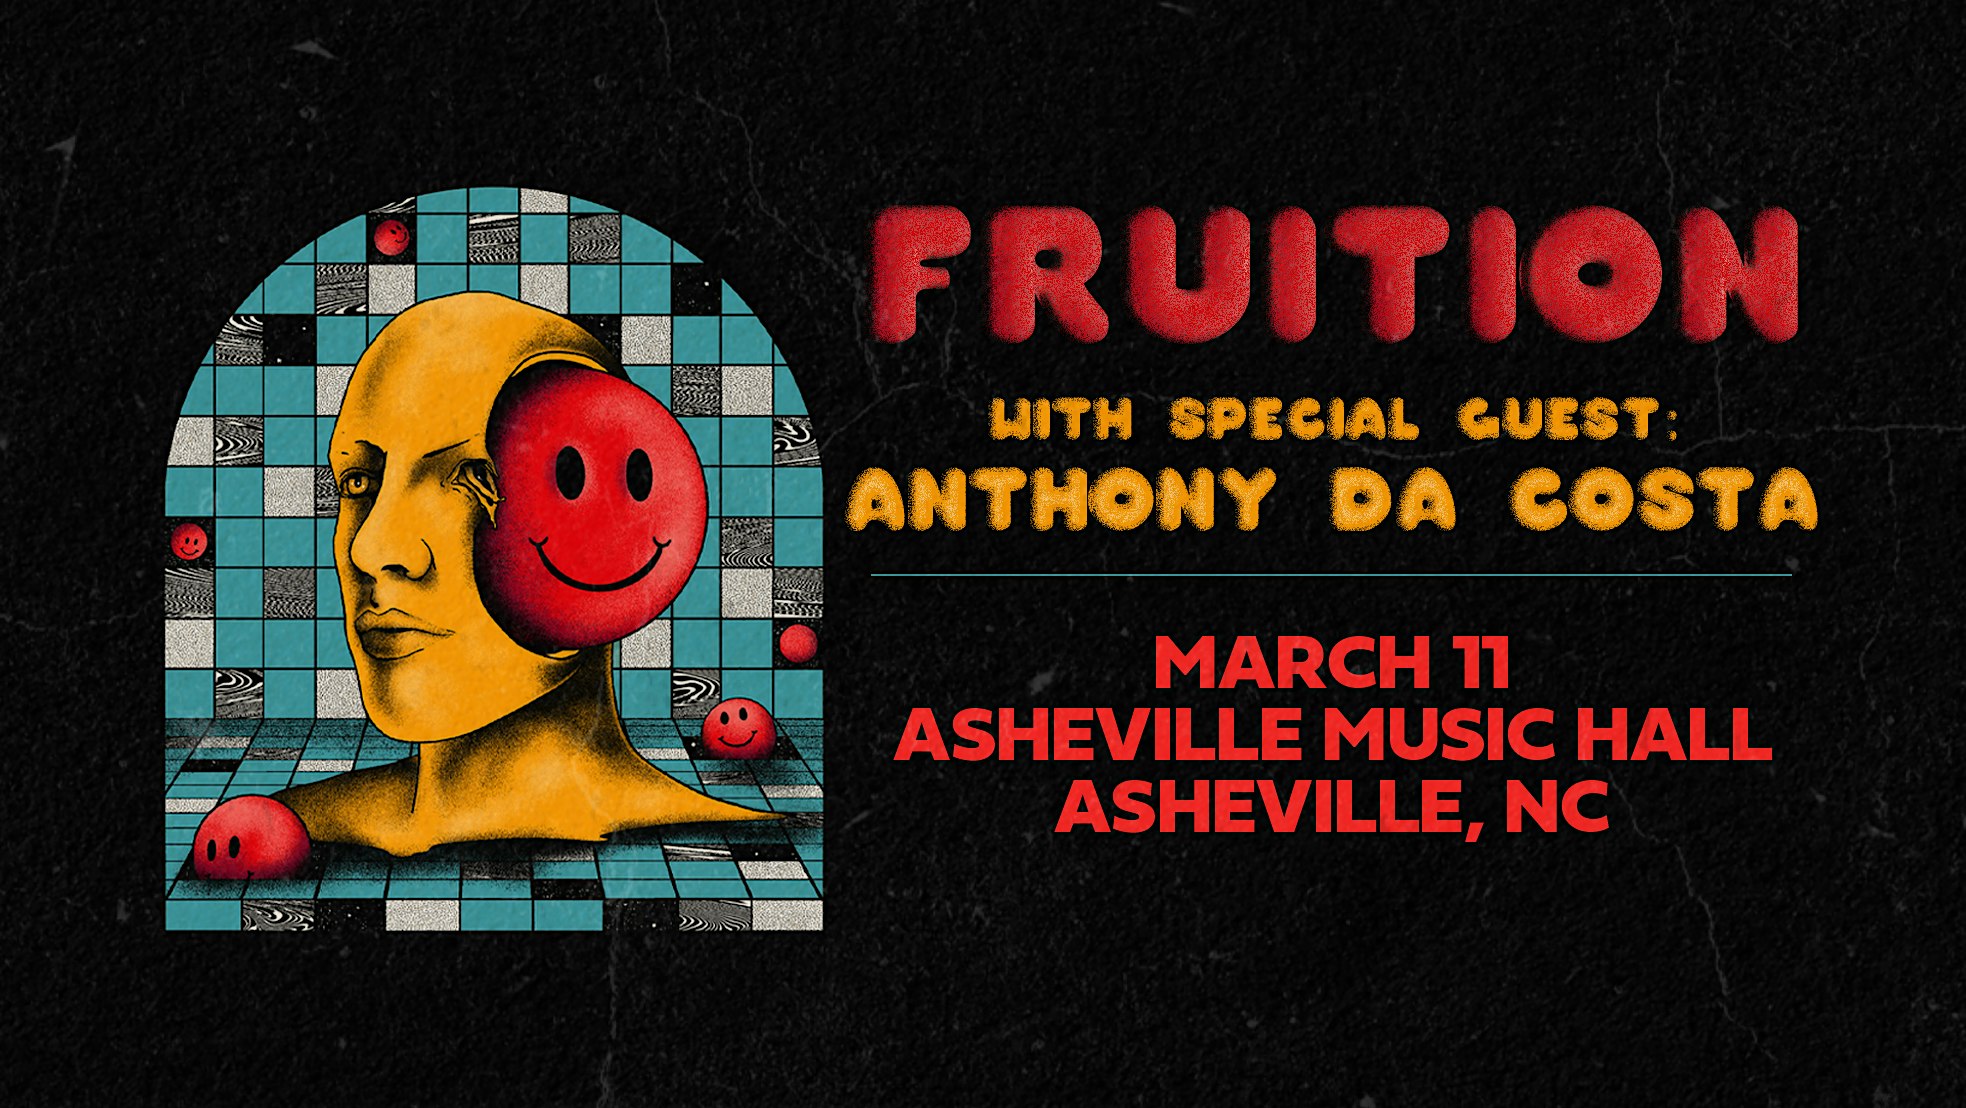 Fruition (with special guest Anthony Da Costa) at Asheville Music Hall